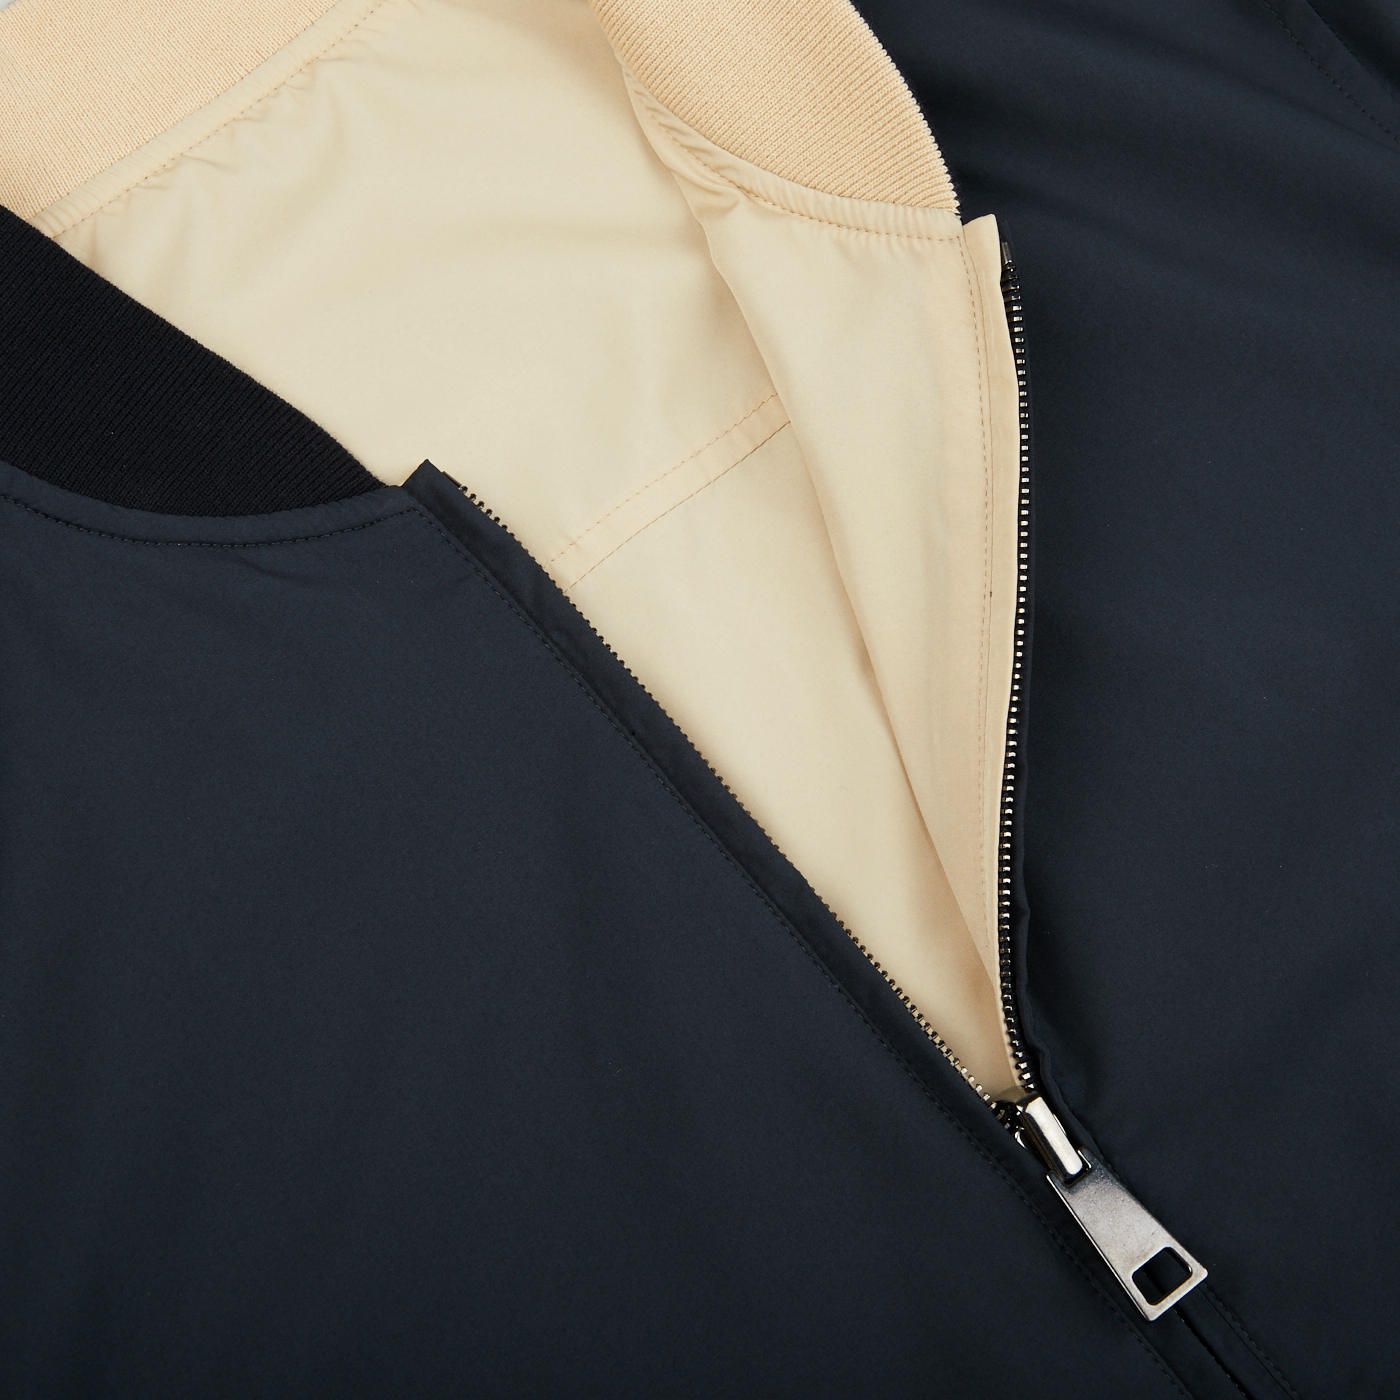 A Canali Navy Blue Beige Reversible Technical Blouson jacket made of technical nylon with a zipper.